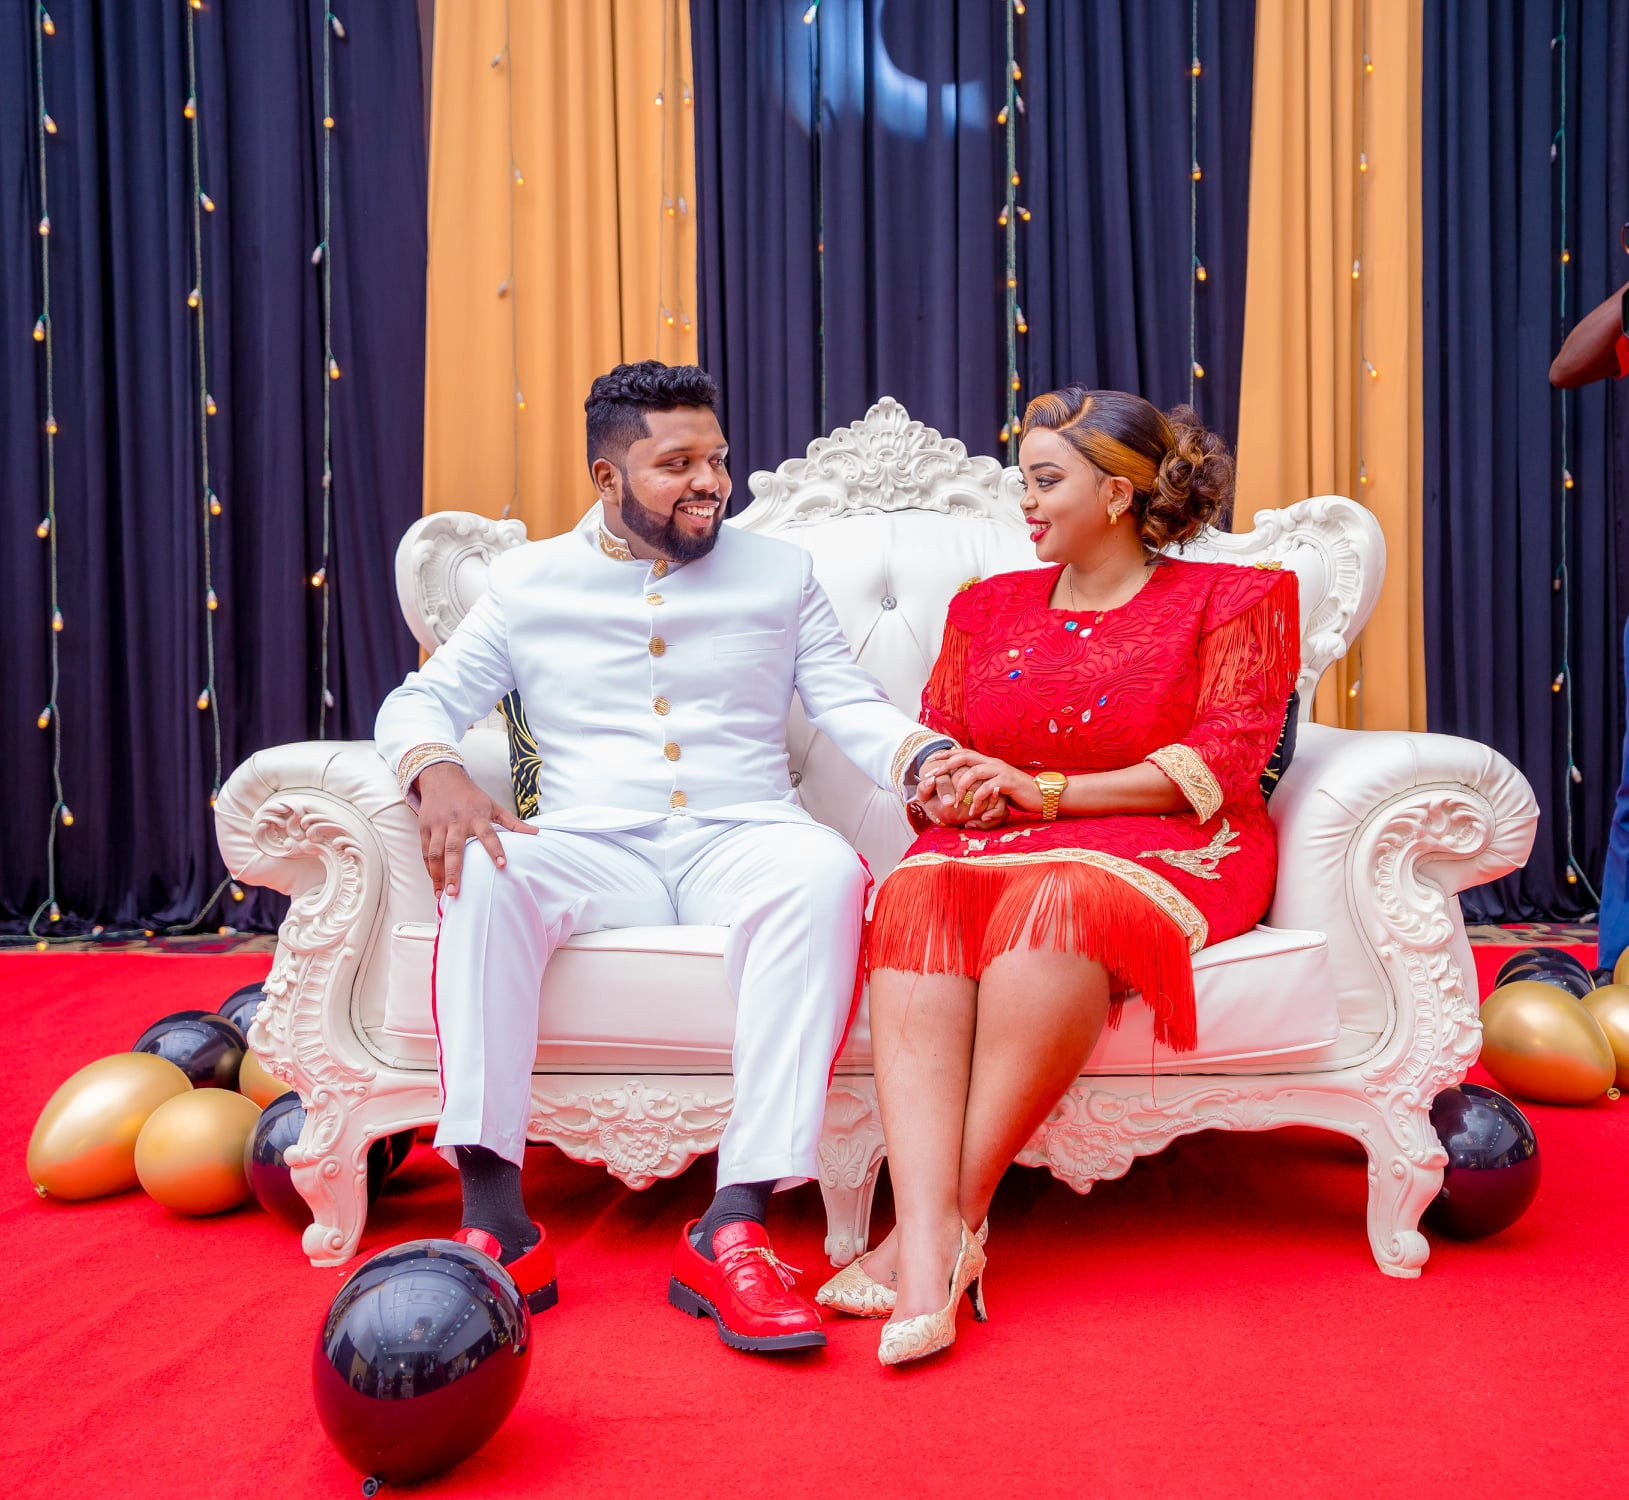 Rev Natasha Recalls How Indian Lovey Dovey Stanley Carmel Slid Into Her DM And Won Her Heart 